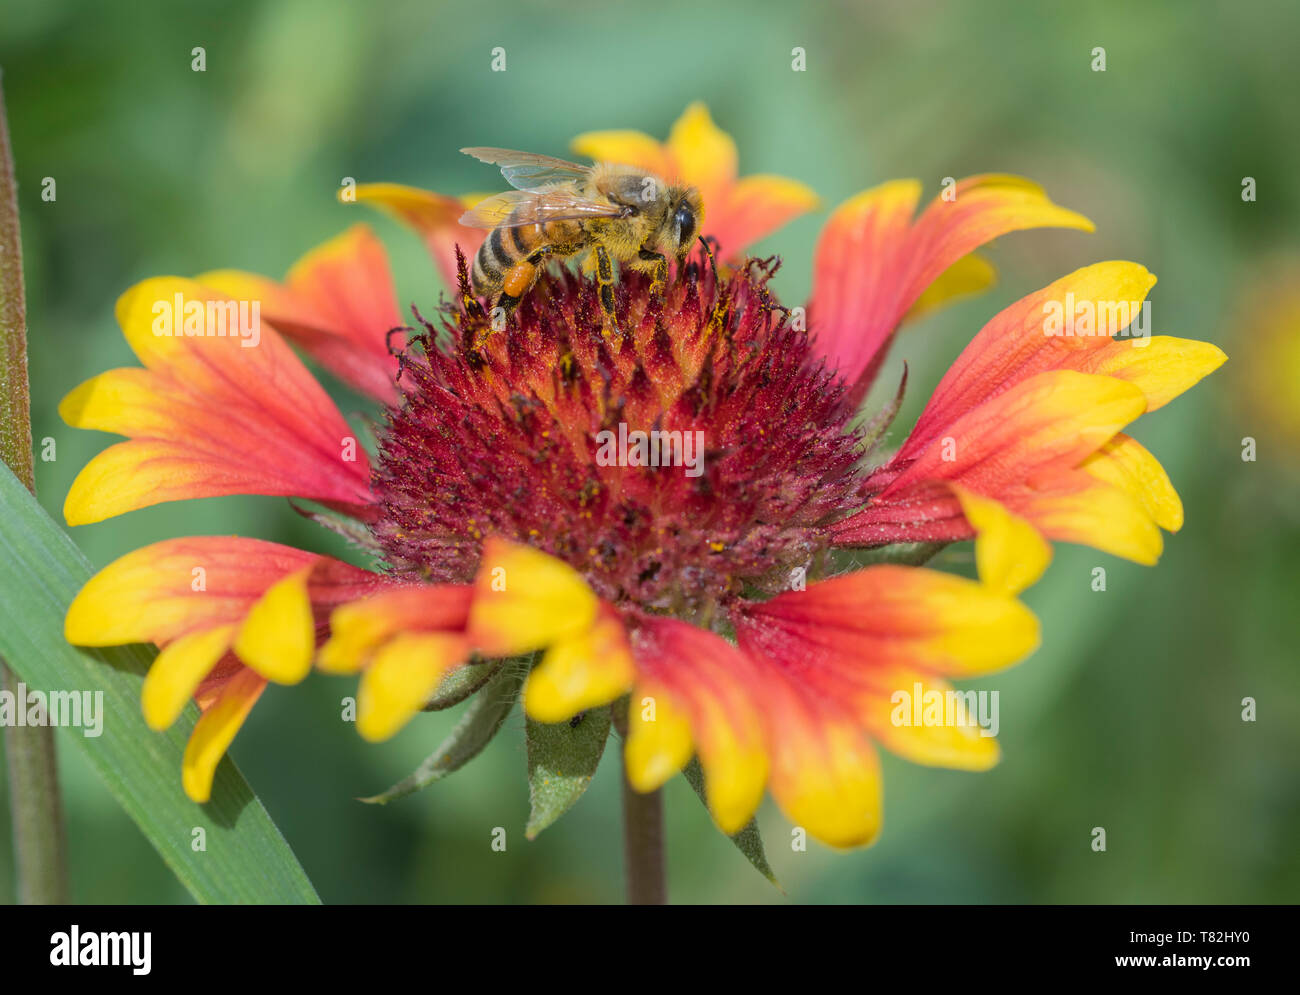 Close-up detail of a honey bee apis collecting pollen on yellow and red firewheel flower gaillardia pulchella in garden Stock Photo